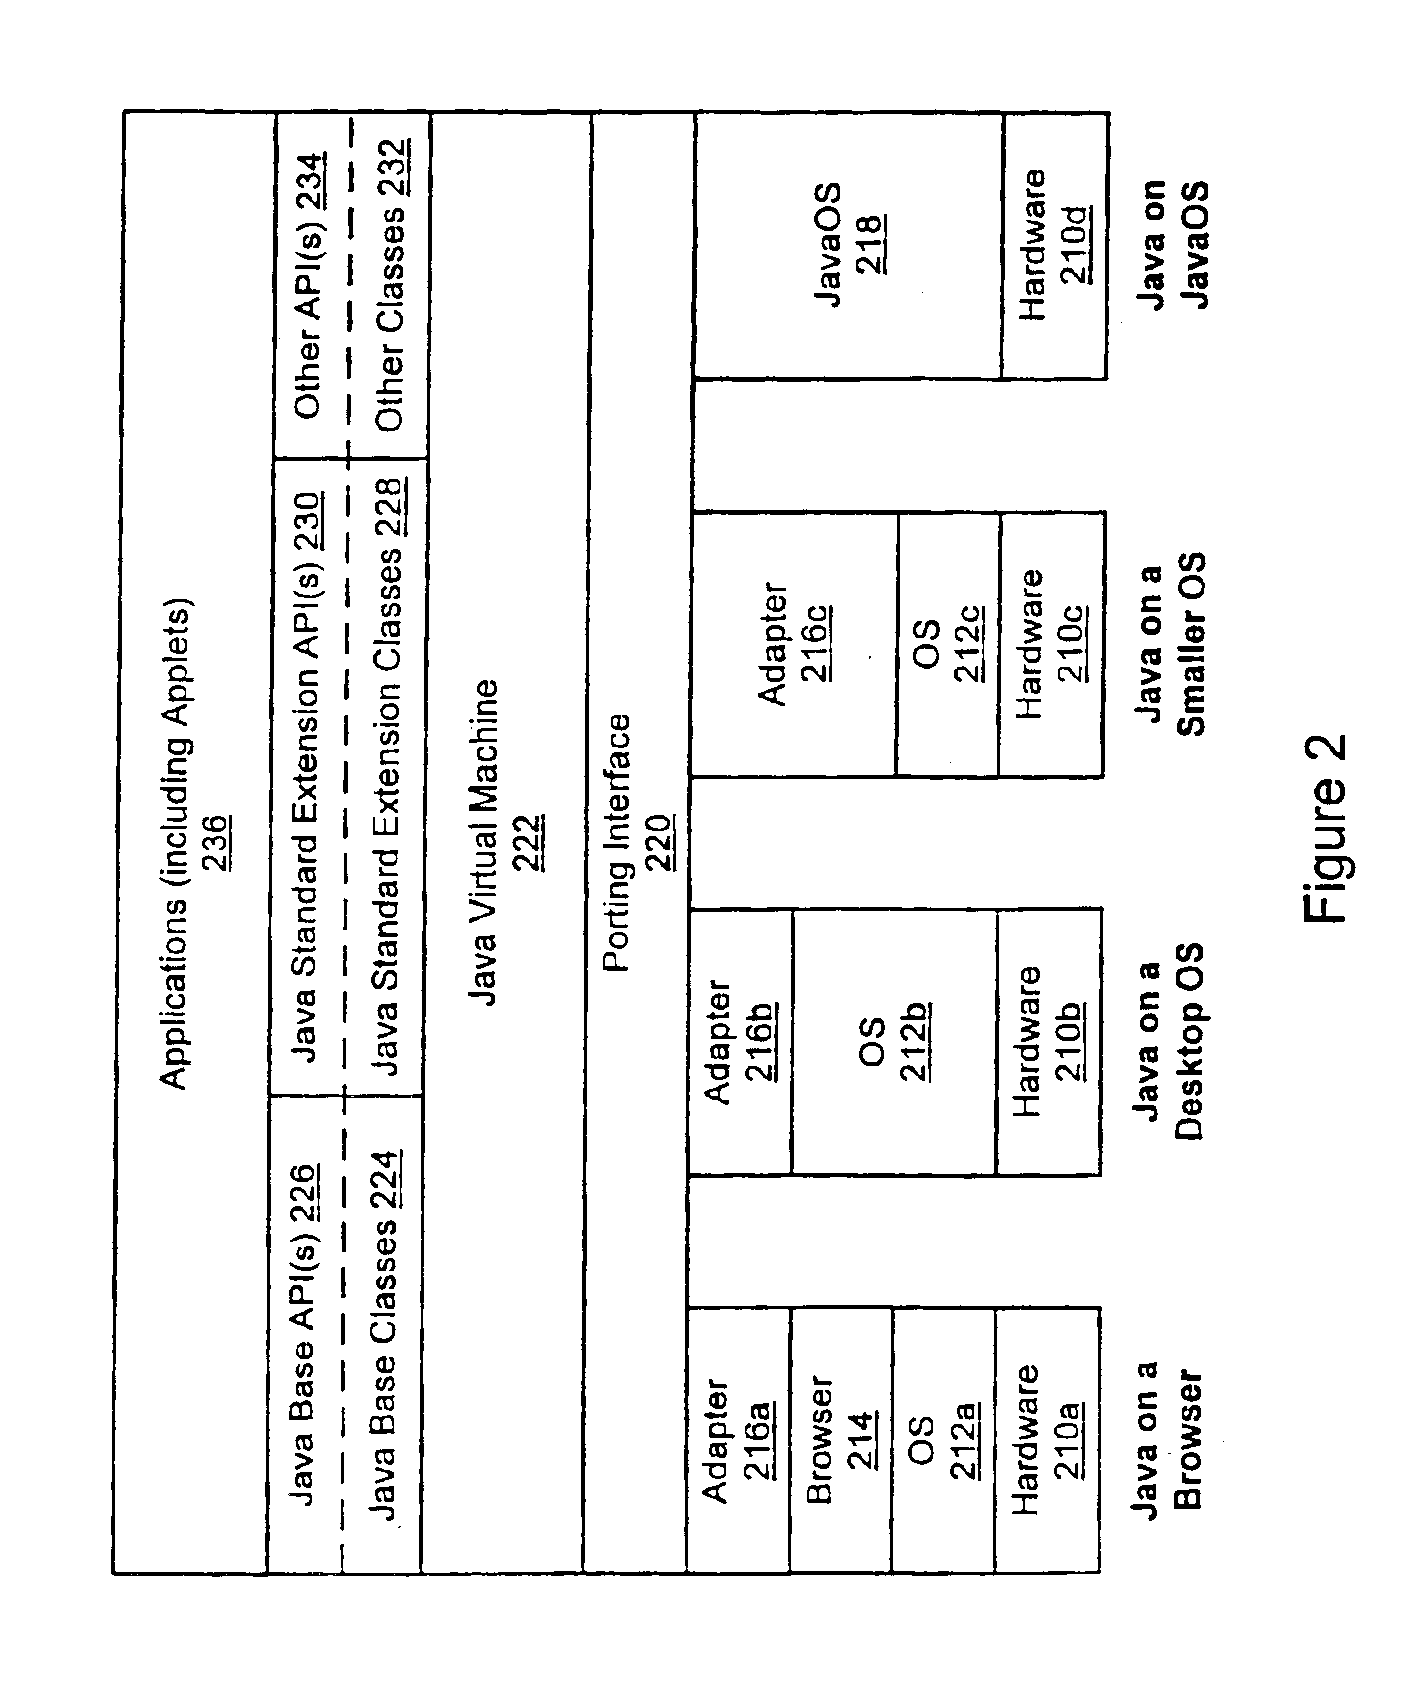 Small memory footprint system and method for separating applications within a single virtual machine